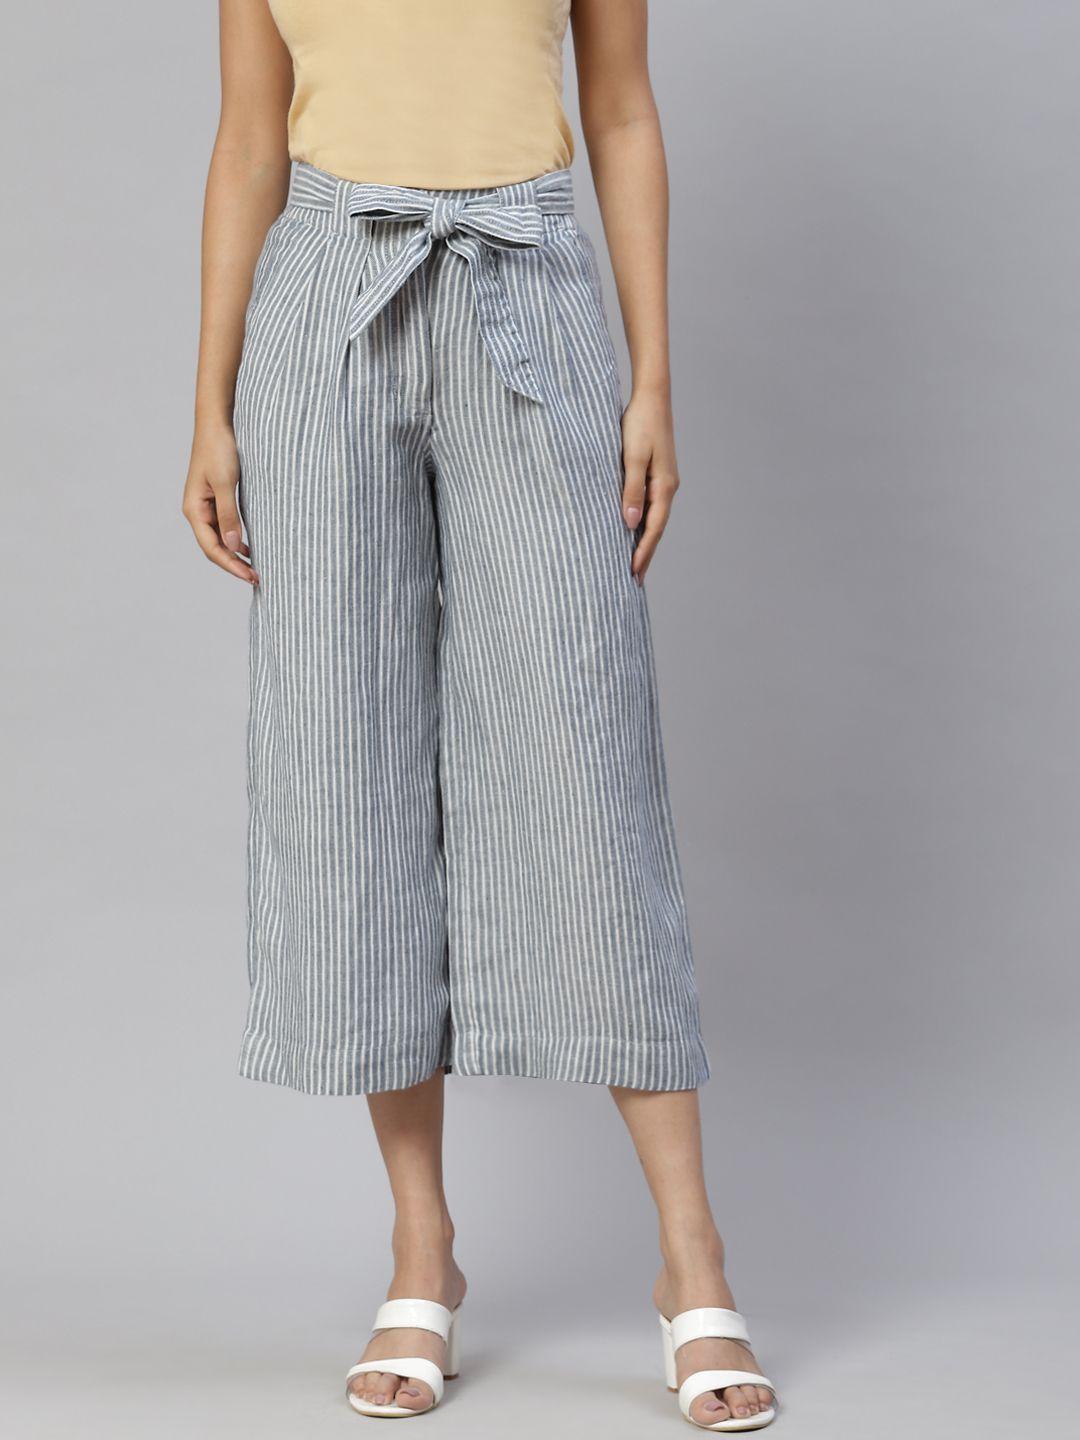 marks & spencer women navy blue striped high-rise pleated culottes